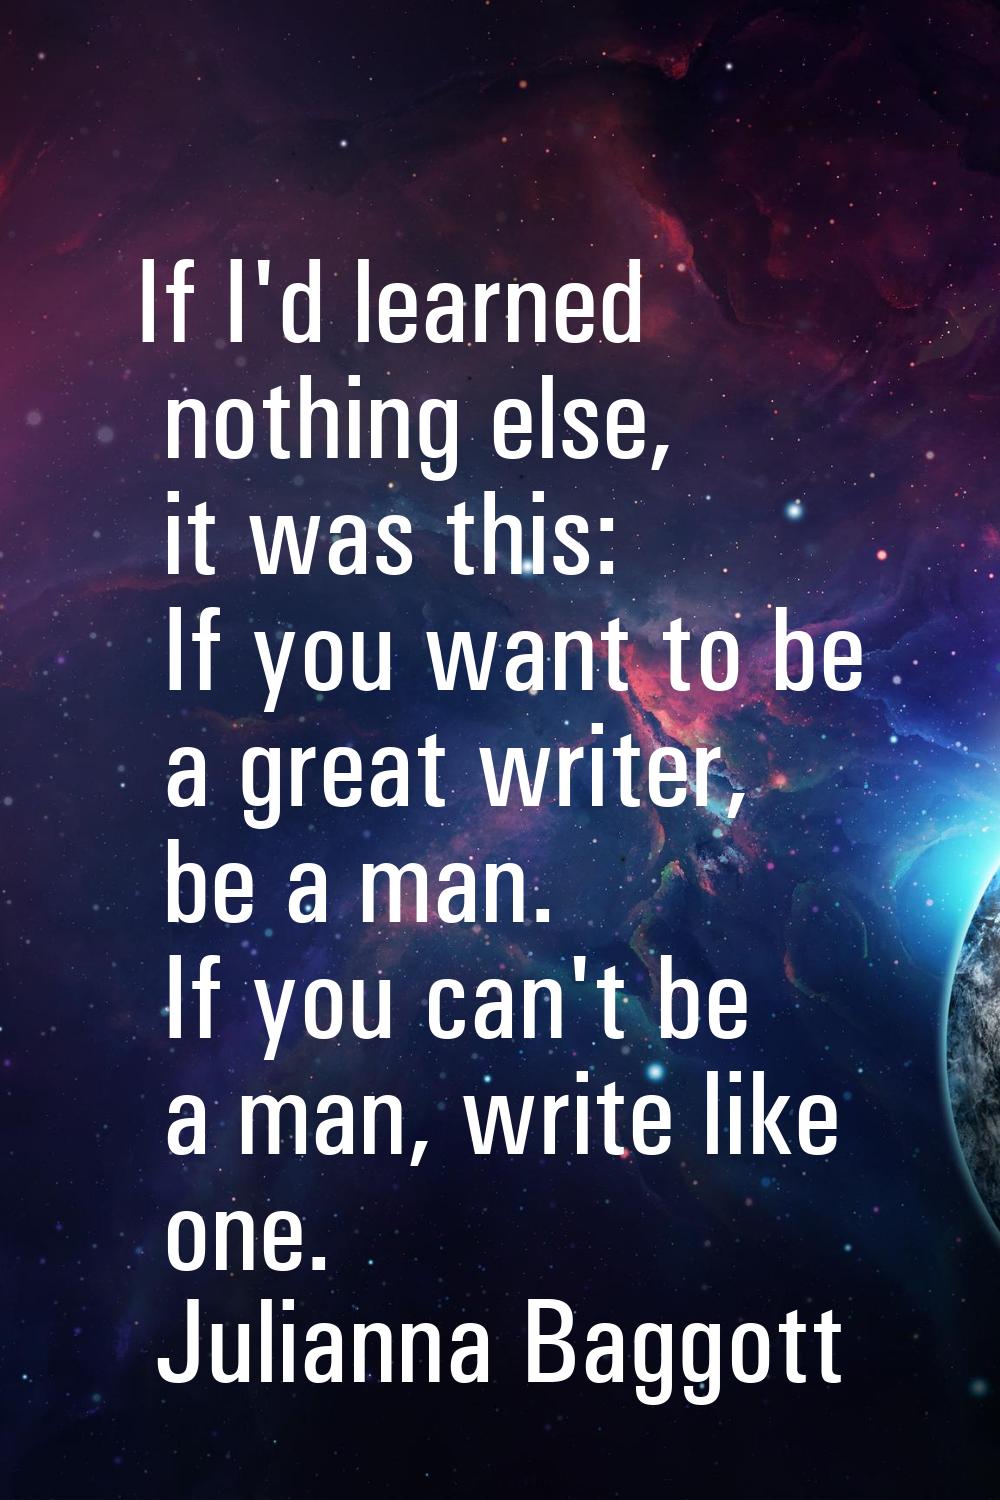 If I'd learned nothing else, it was this: If you want to be a great writer, be a man. If you can't 